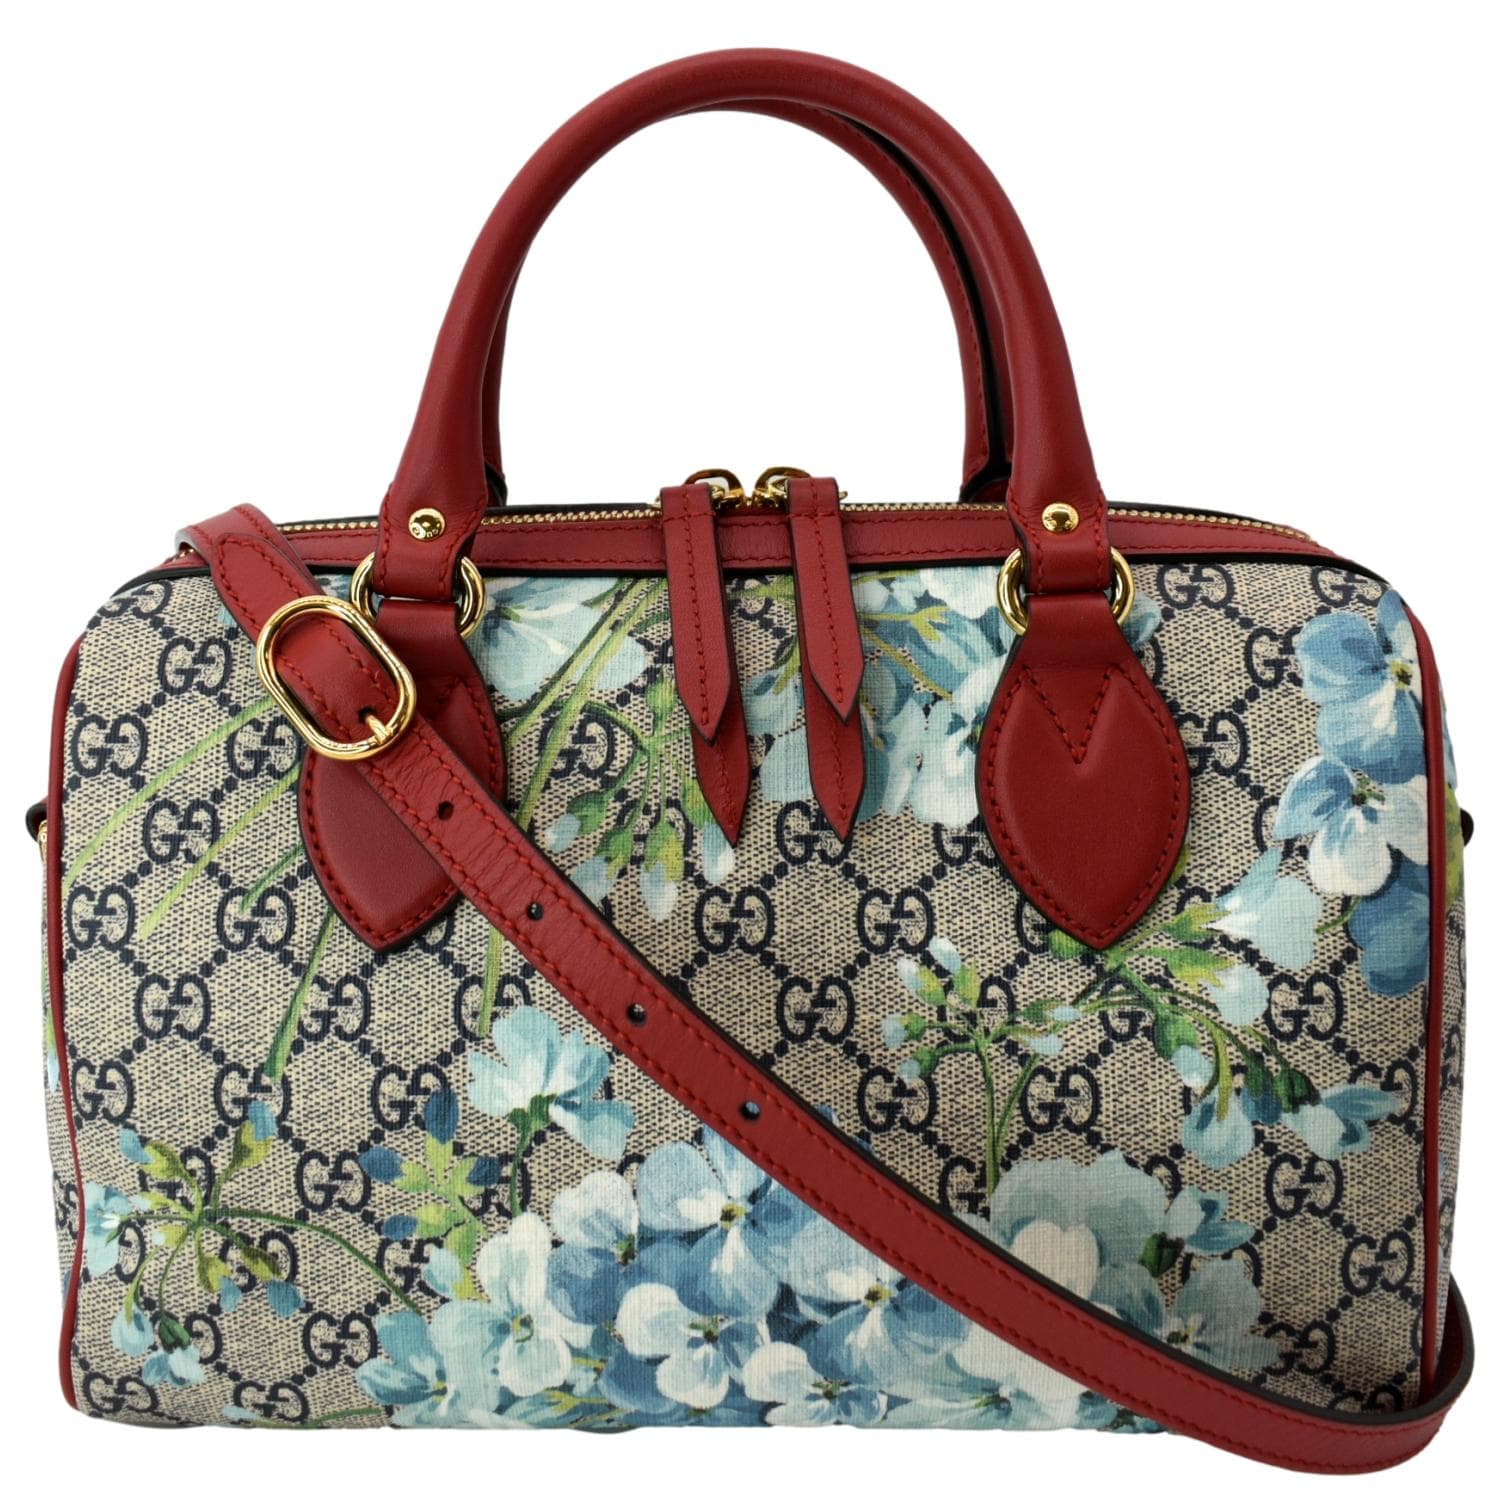 gucci, flowers, and rose image  Bags, Fashion bags, Luxury bags